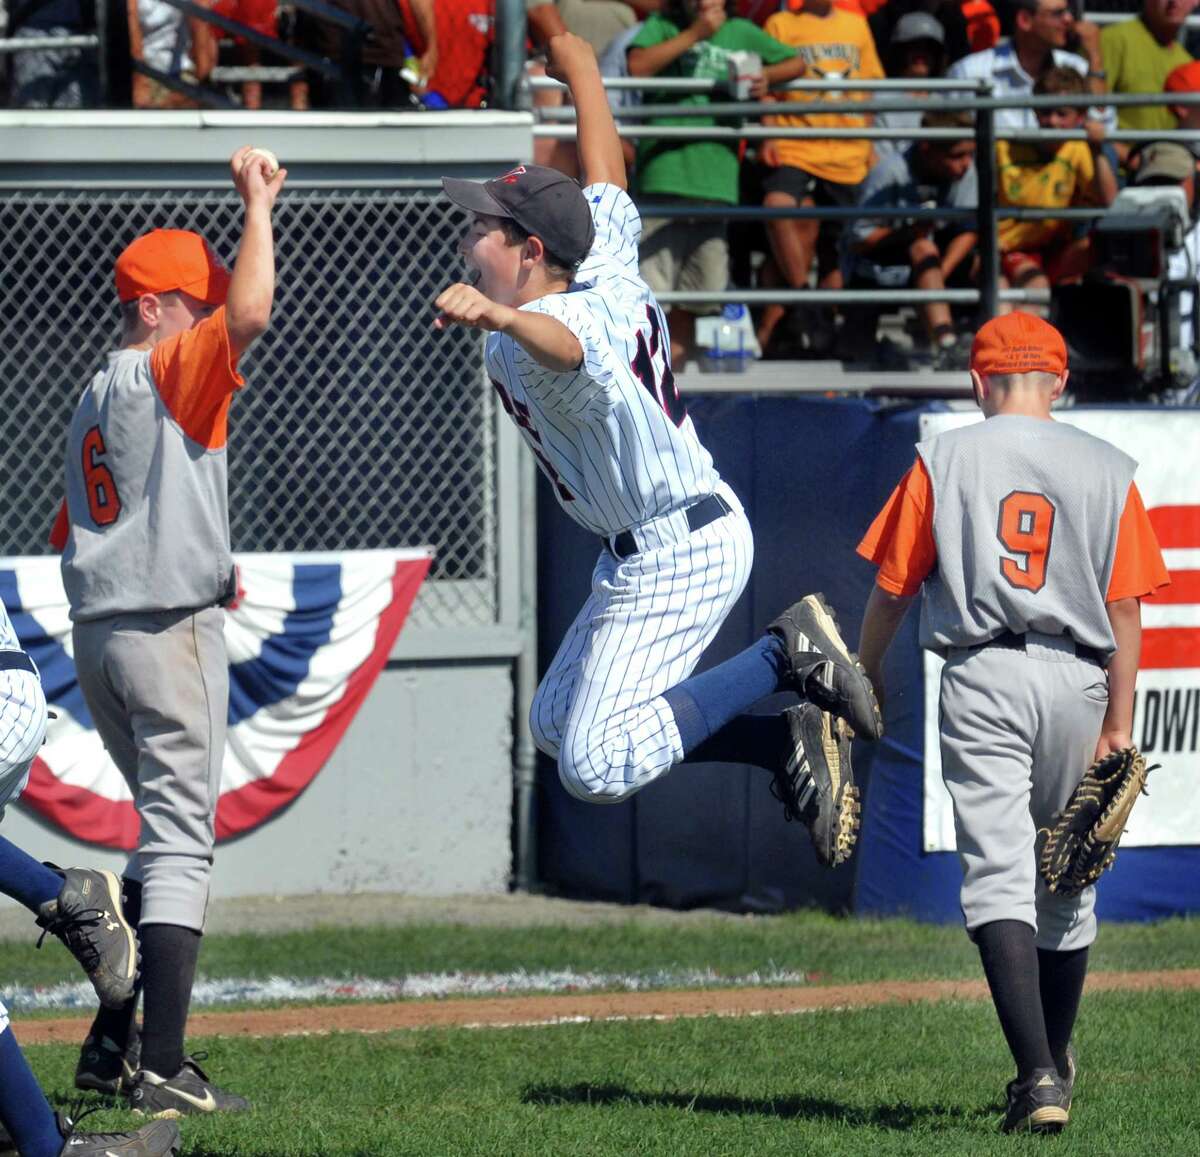 8/11/07 1Shelton LL ML0382A 2007 Eastern Regional LL Tournament, Bristol: Walpole's Samuel Falkson jumps for joy after Walpole beat Shelton for the spot at Williamsport. Shelton's closer Ryan Testani is at left, and Jacob Lennertz is at right return to the dugout. Photo by Mara Lavitt